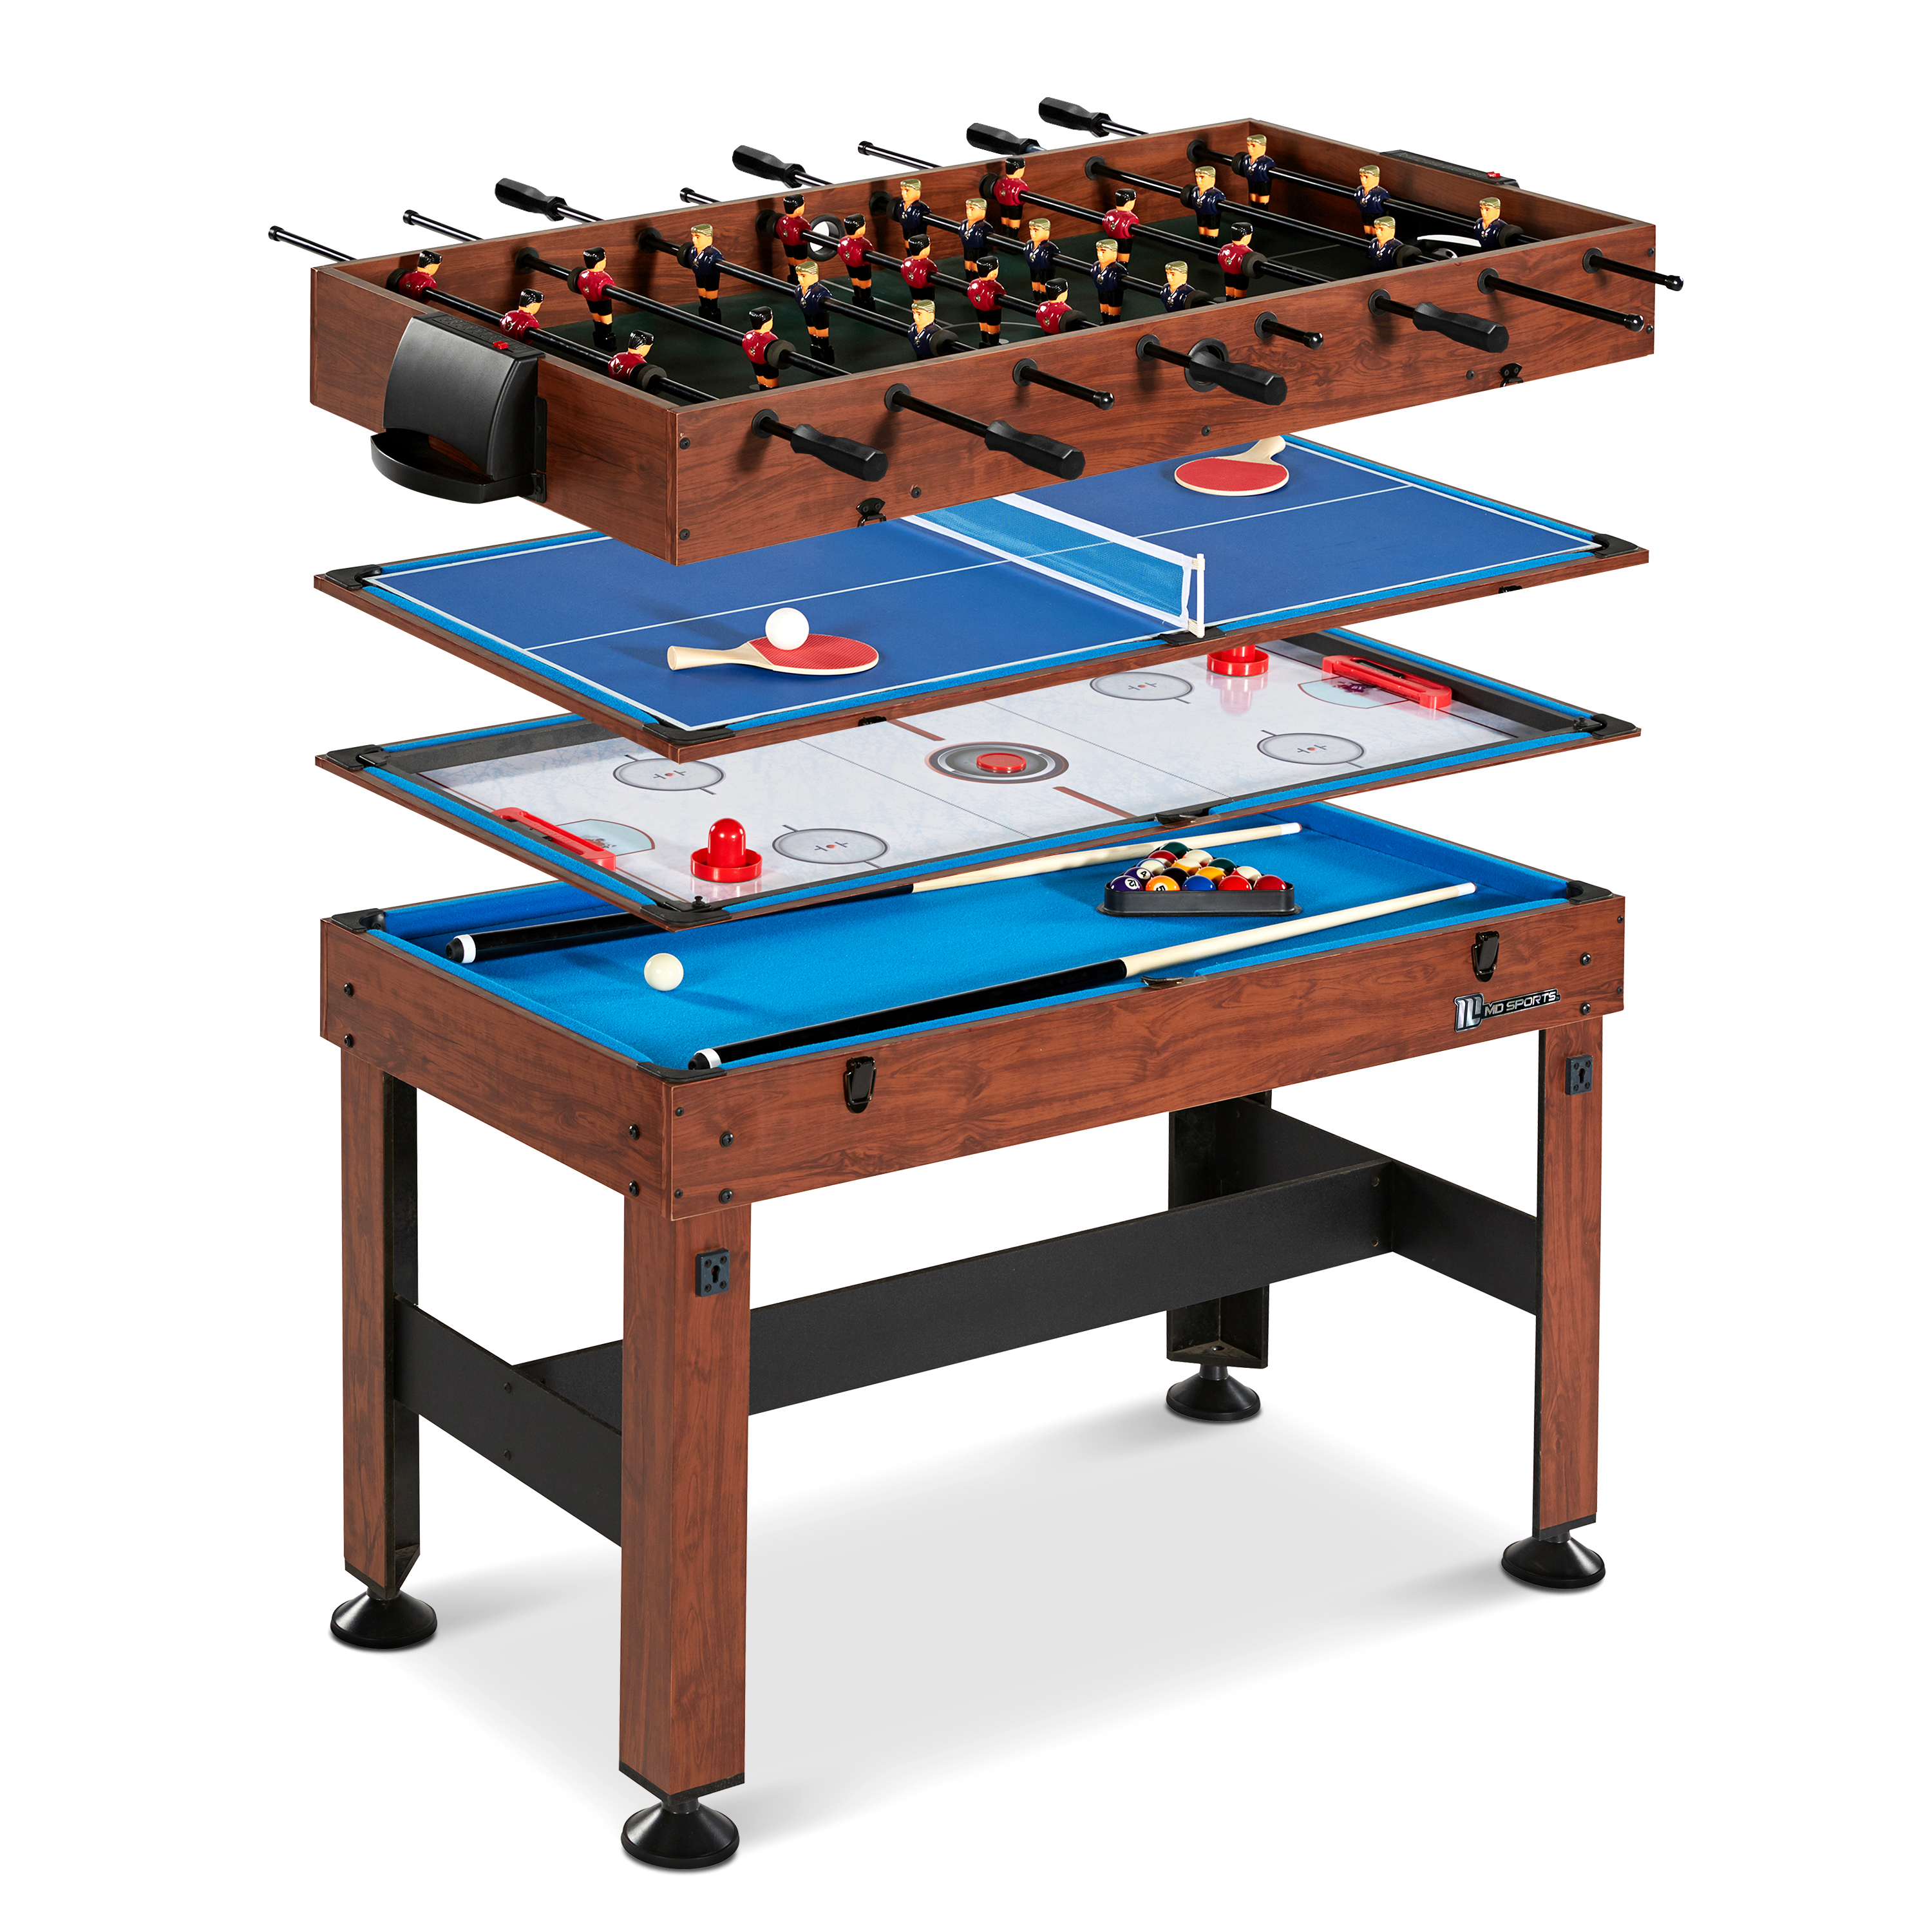 MD Sports 54" 4 in 1 Combo Game Table, Foosball, Hockey, Table Tennis, Billiards - image 3 of 13